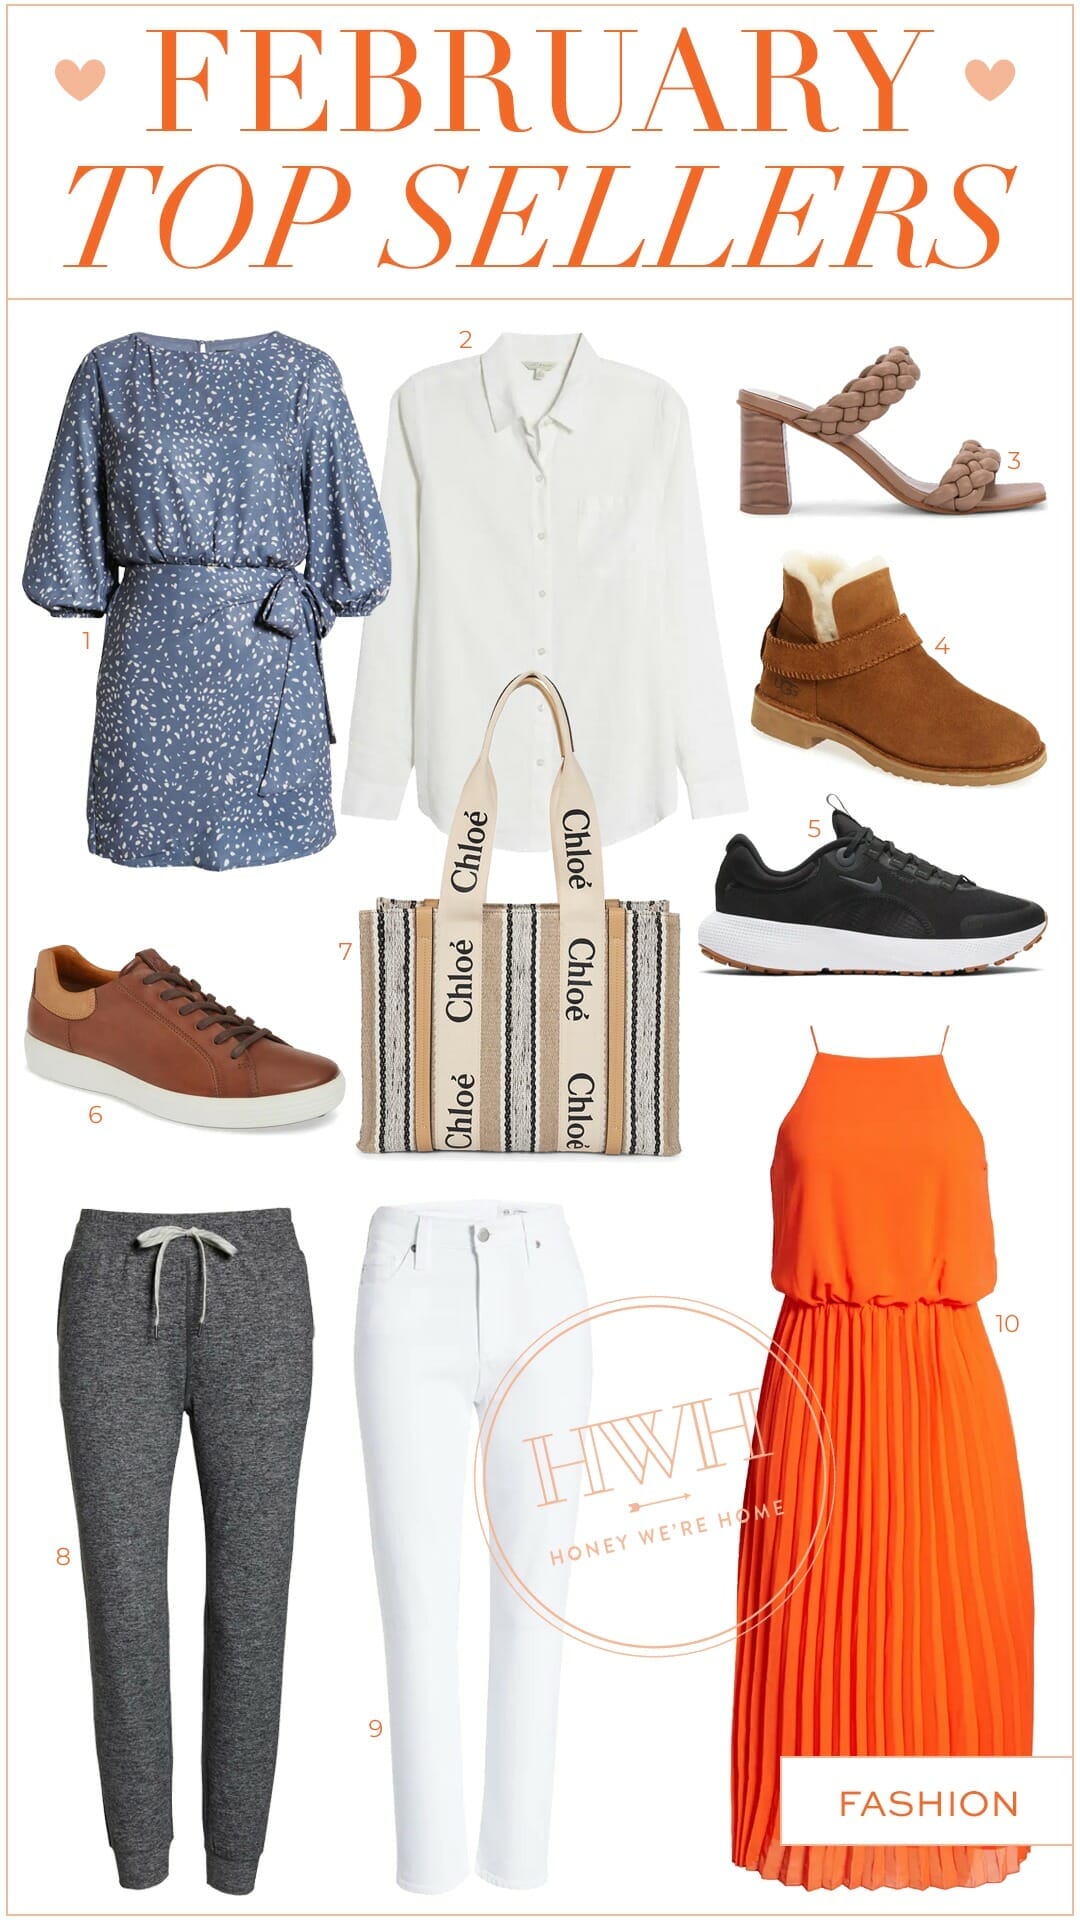 WHAT'S NEW TO MY WARDROBE FOR FALL (+ HONEYLOVE PROMO CODE) 